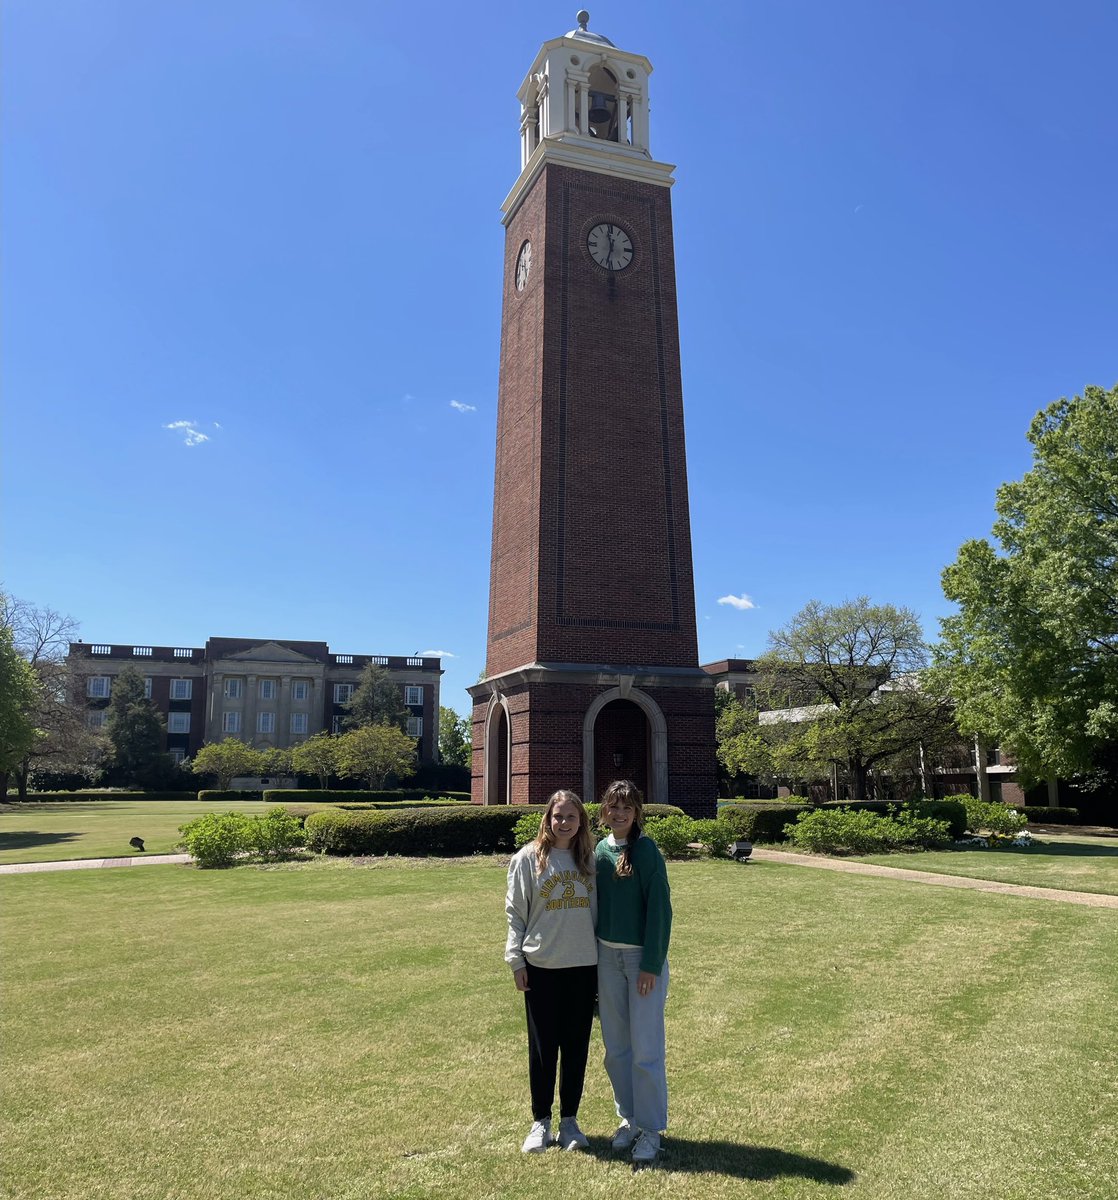 Grateful for our Spring Interns, Lucy Woodke and Skylar Jones, the last of many wonderful #Birmingham-Southern students who have worked with us. Many thanks to all the #BSC alumni and faculty who have helped us #DefendRivers since 2001. Please let us know if we can ever help you!